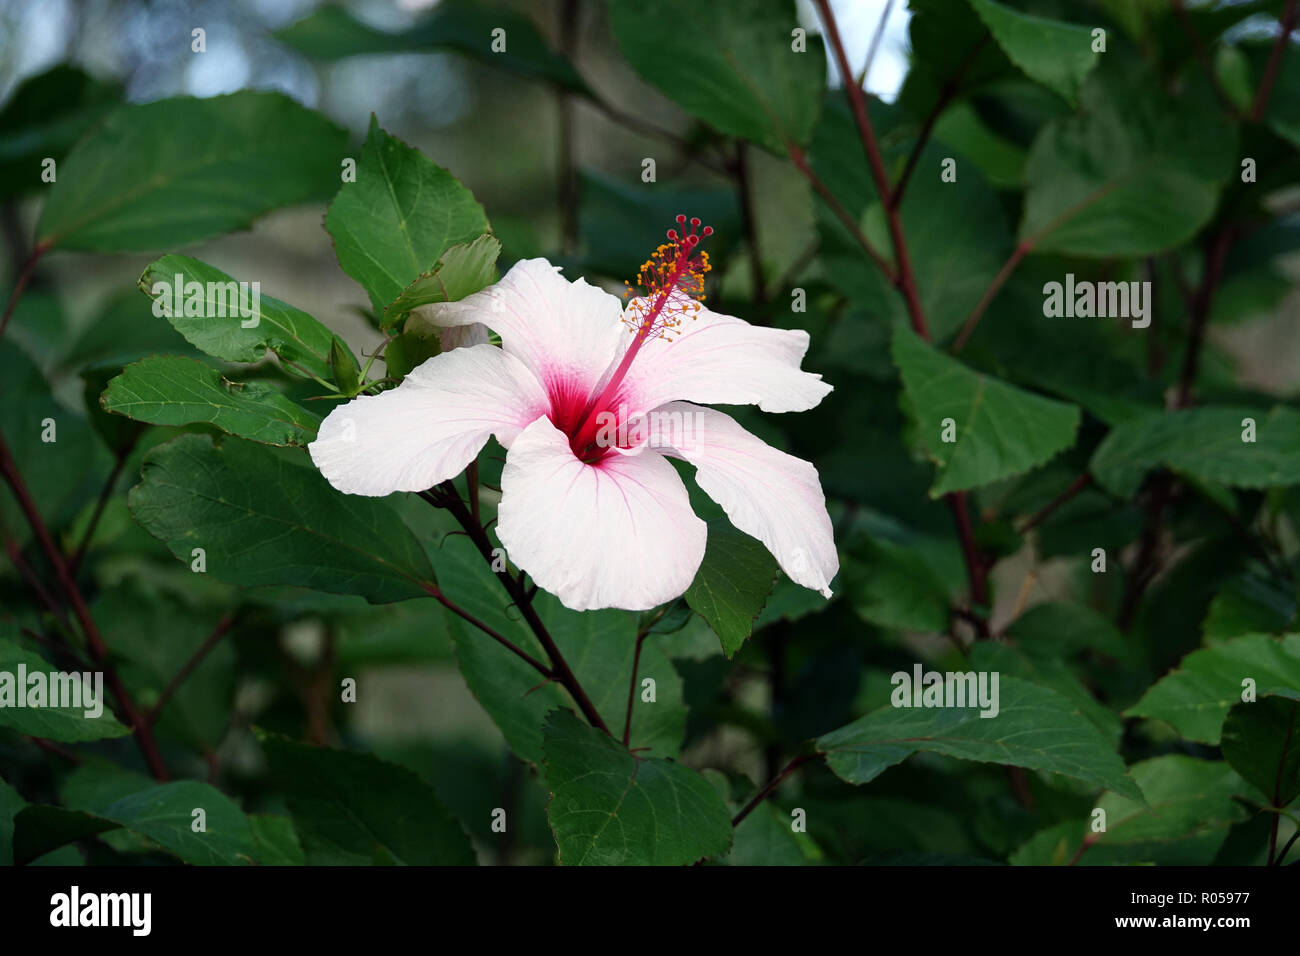 Hibiscus Flower In English Garden High Resolution Stock Photography And Images Alamy